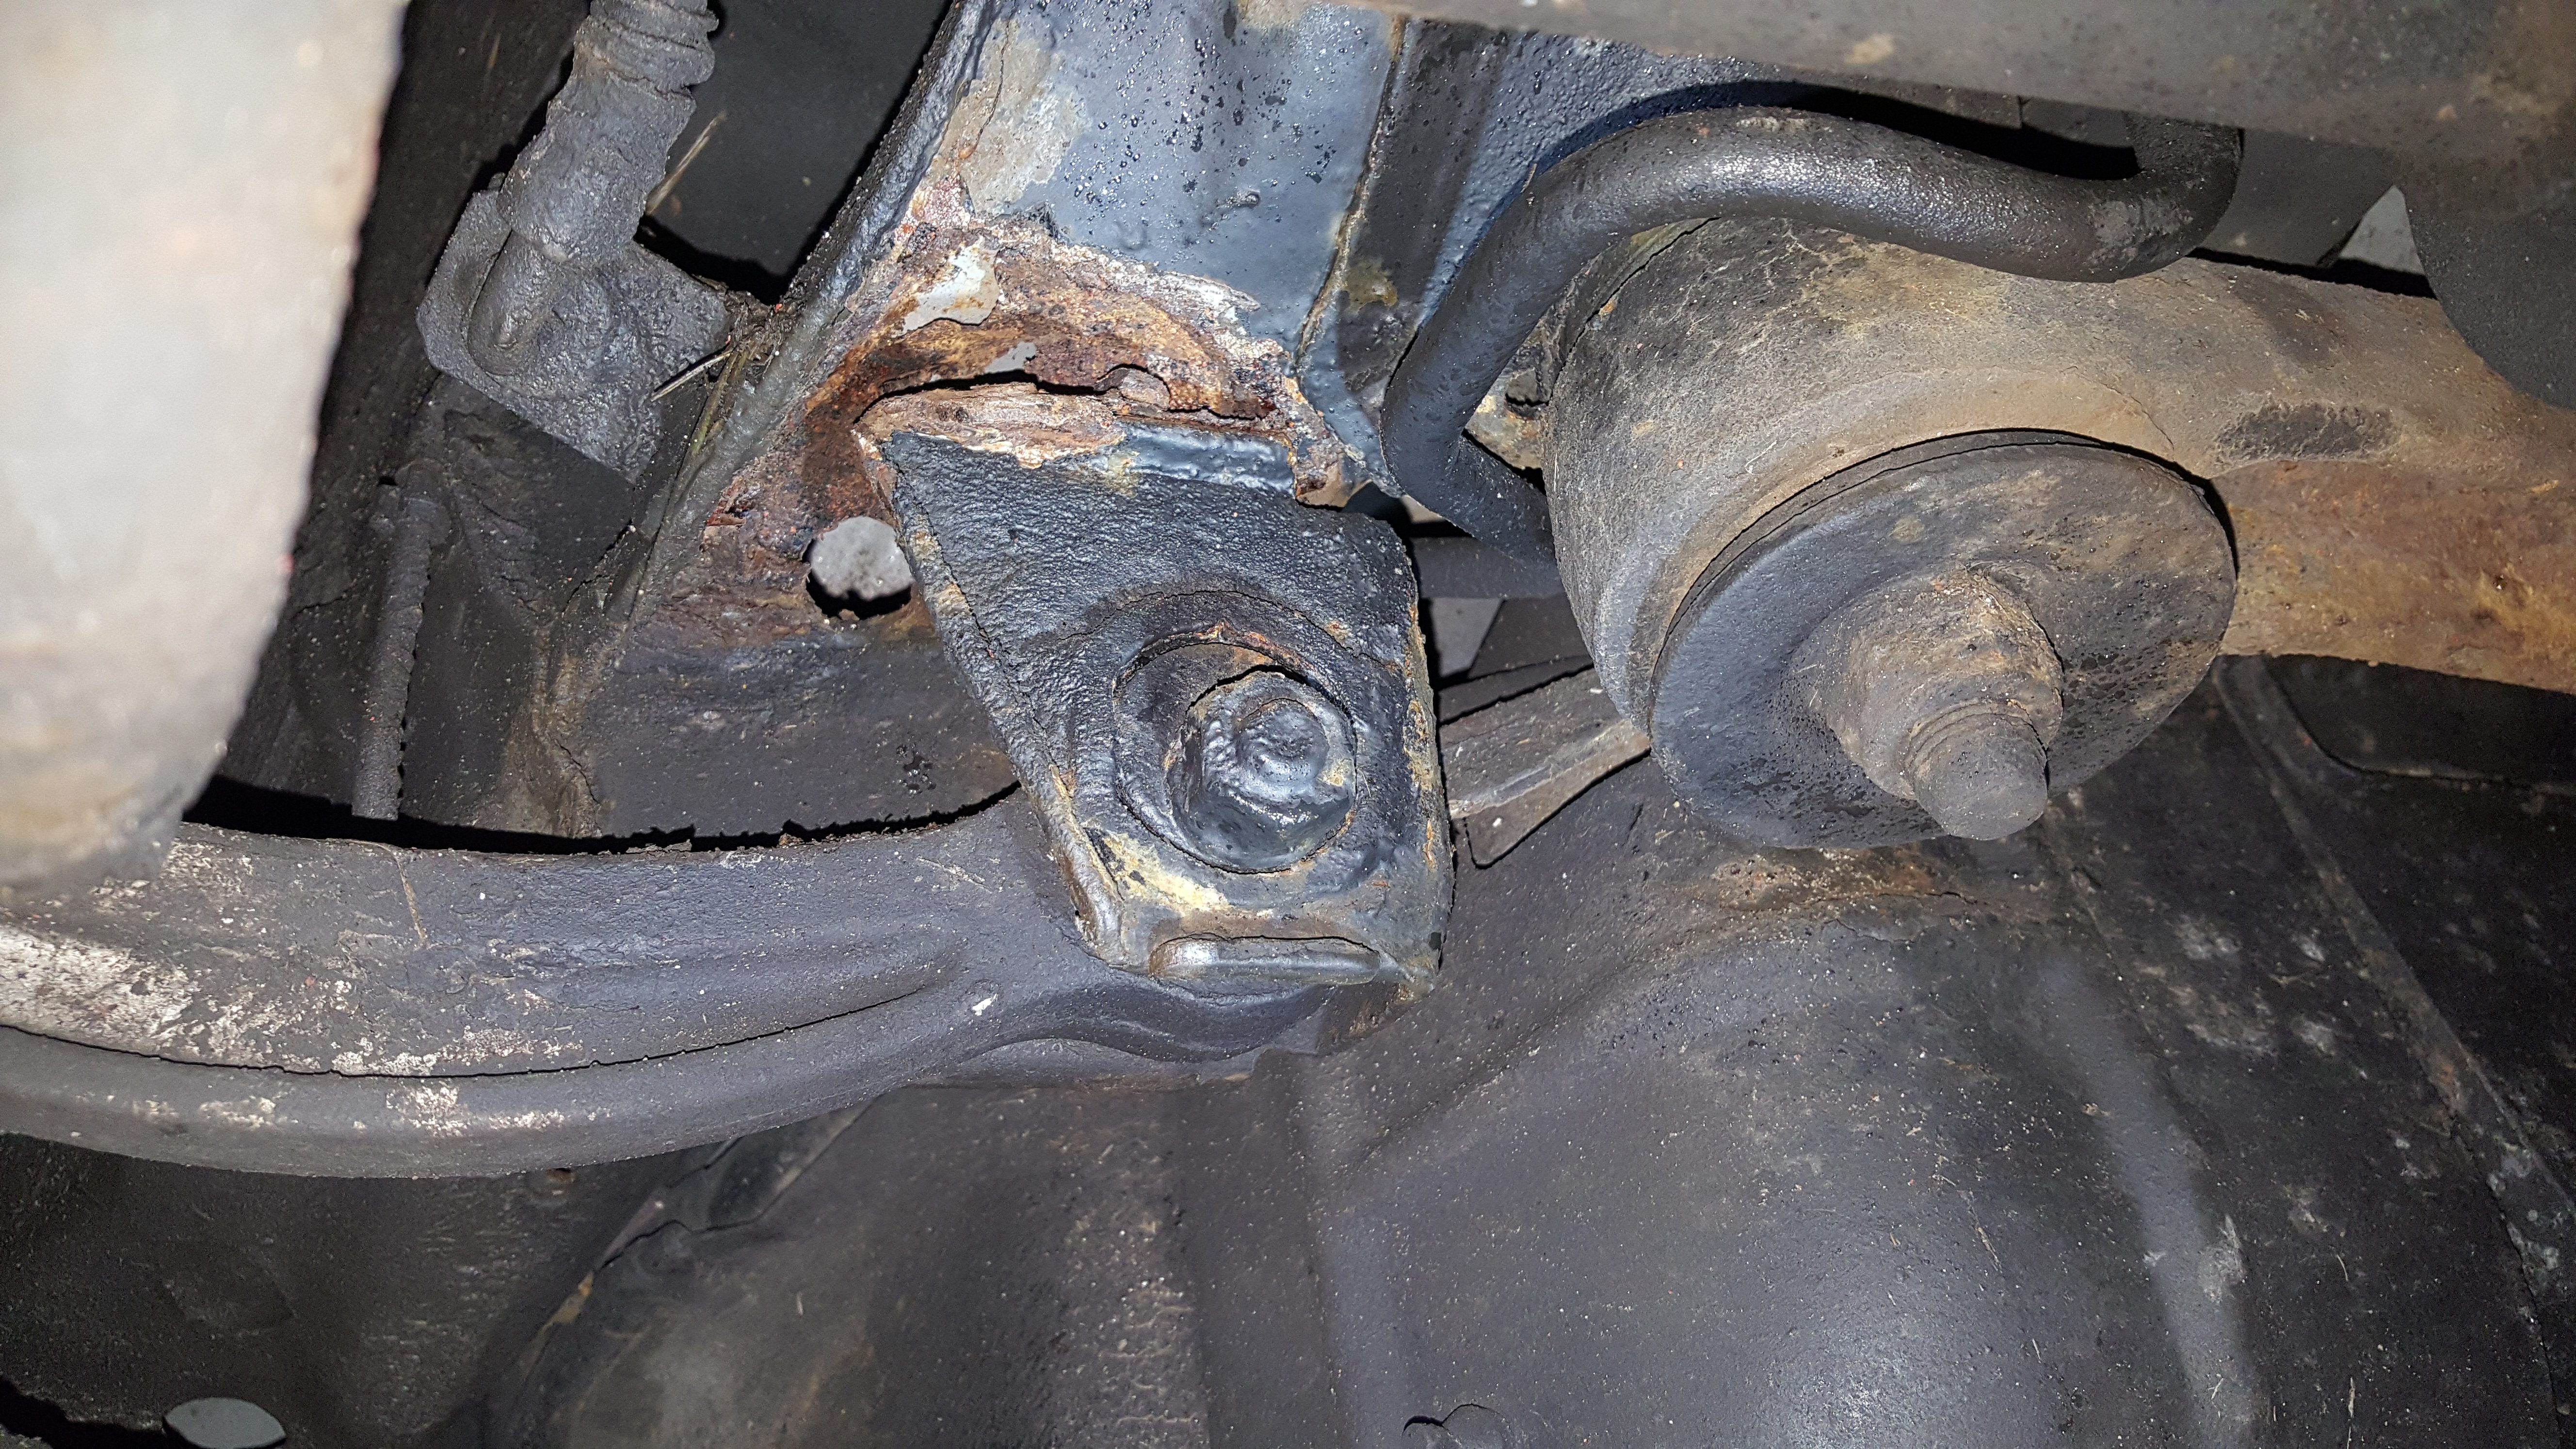 Car buyers advised to take care after faults found in vehicle.